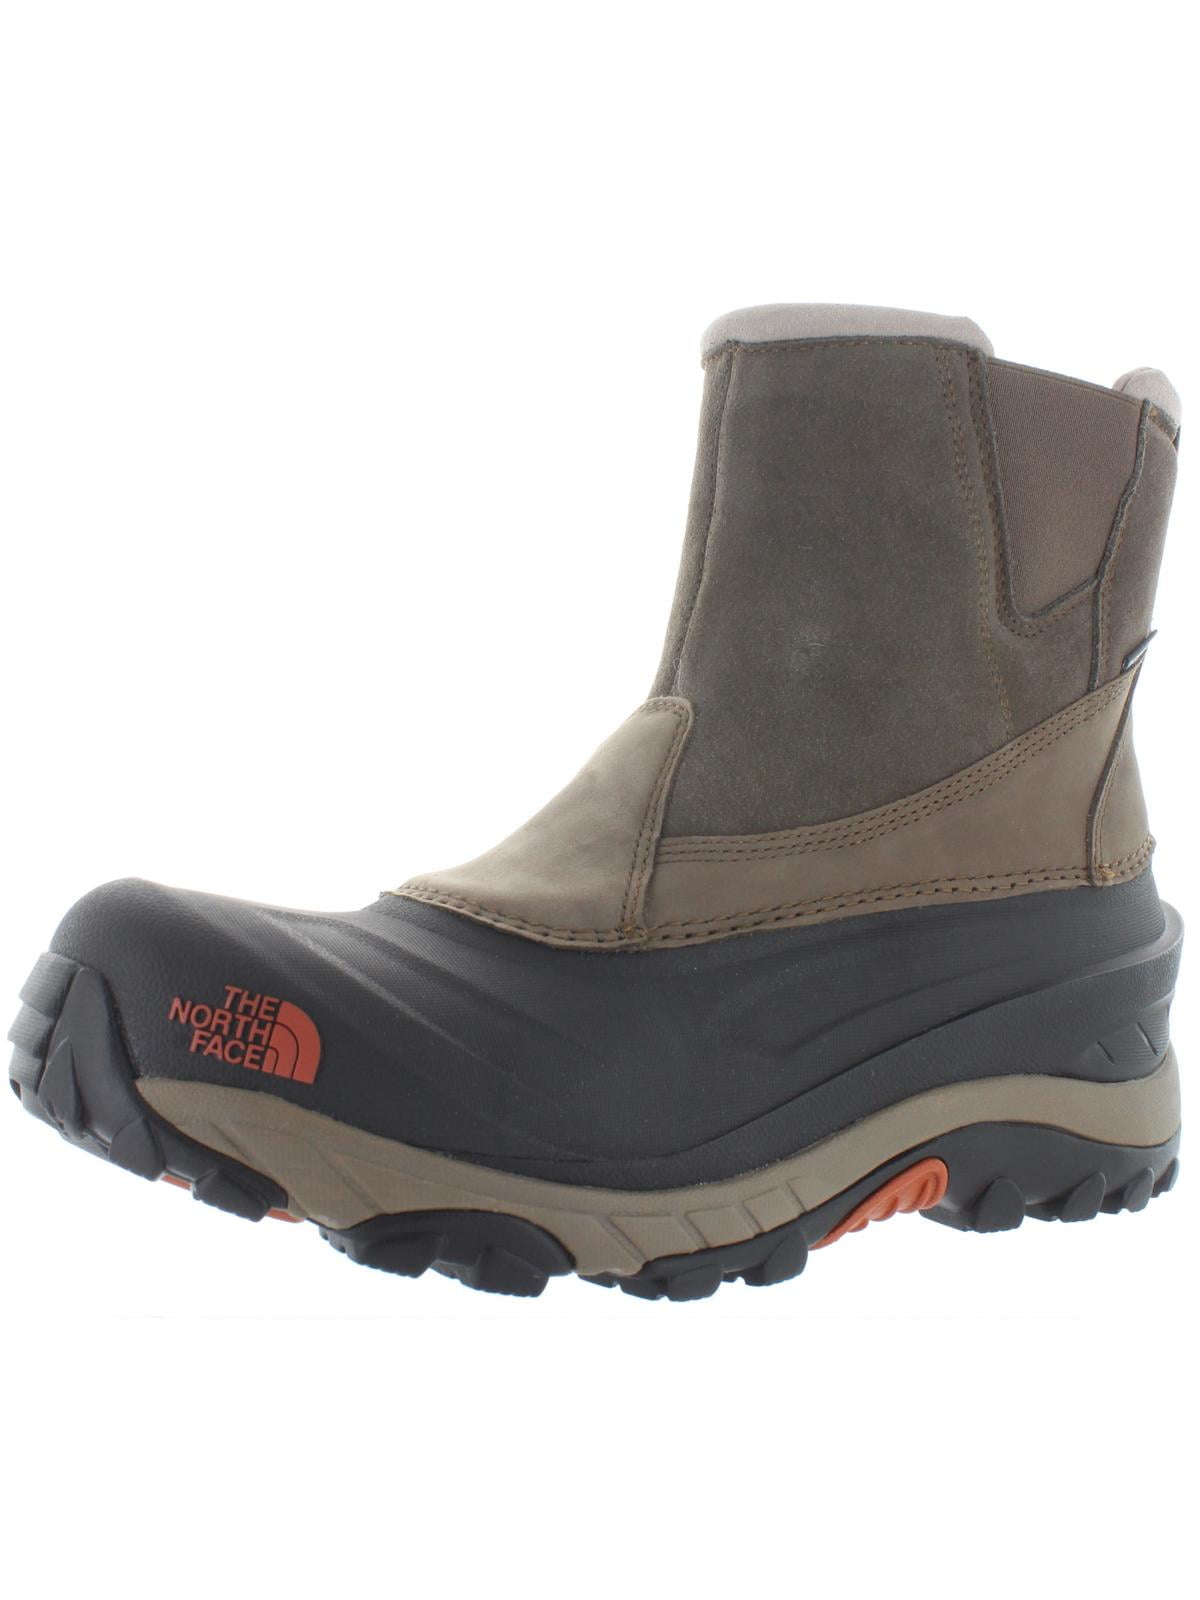 Men's The North Face Chilkat III Pull-On Snow Boot - Walmart.com